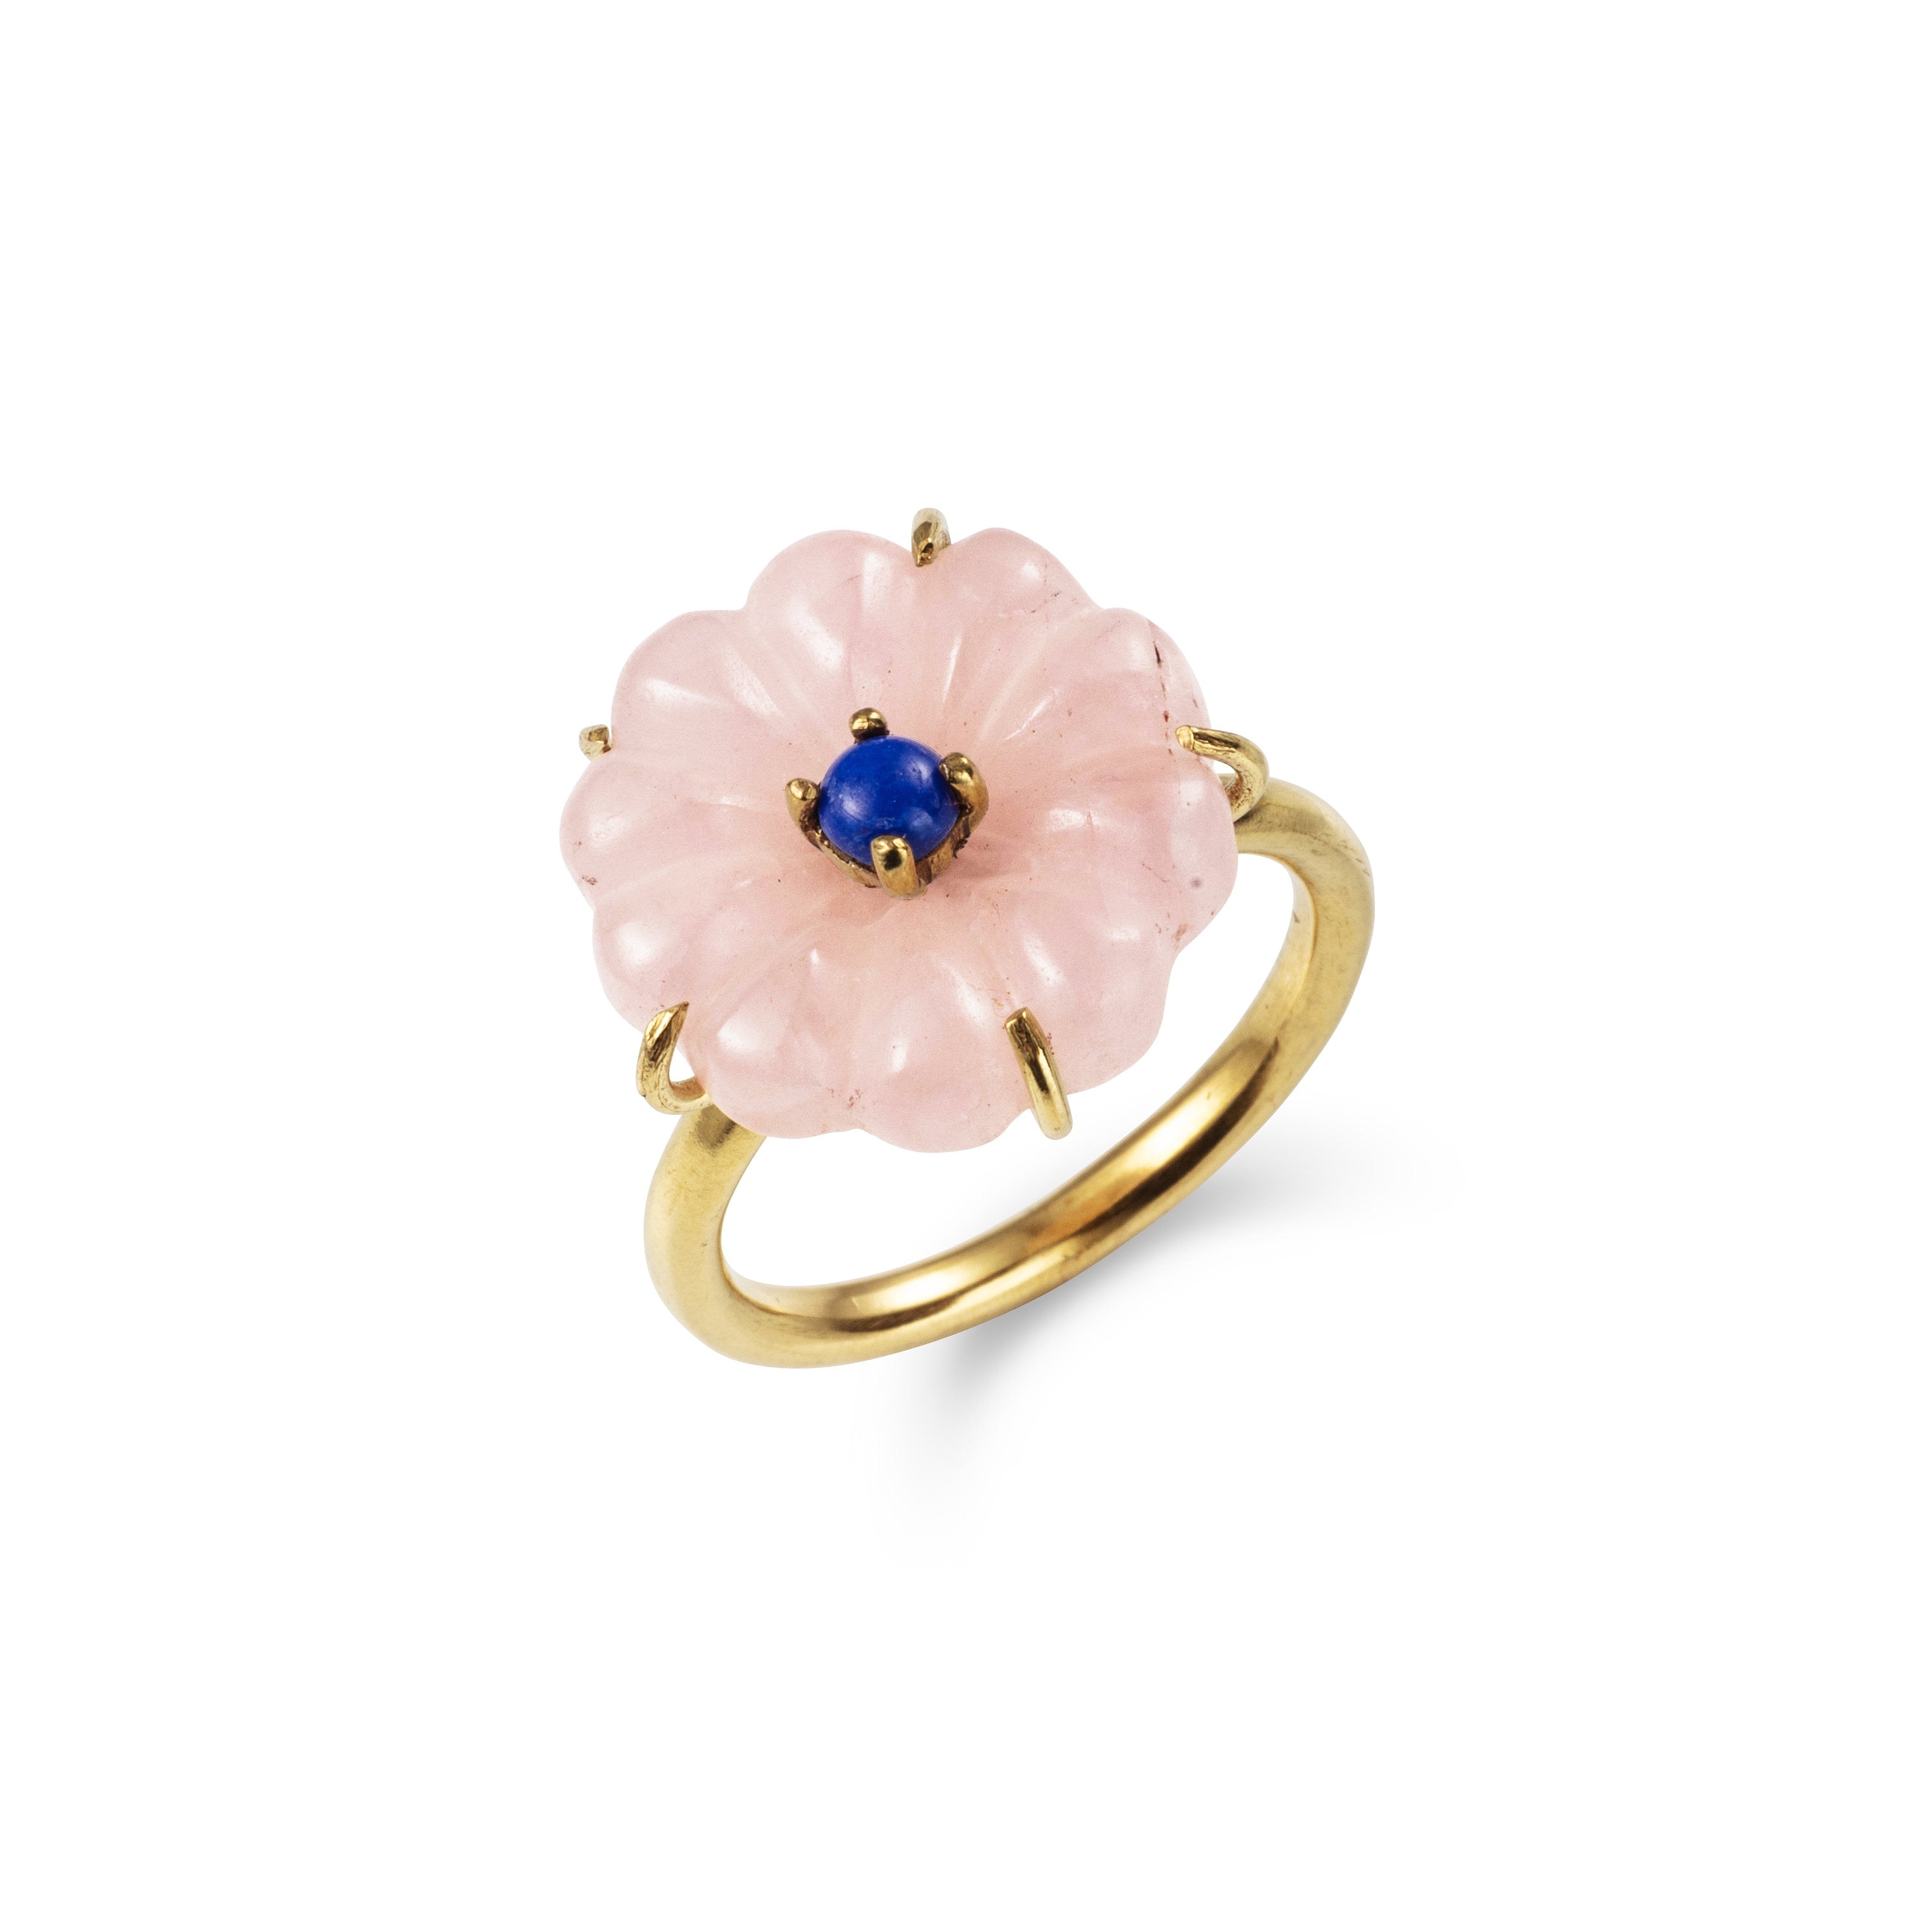 Handmade Afghan Morganite Gold Plated Brass Ring Flower Lapis Lazuli Chic Minimalist Inspired Jewelry Pink Blue Artisanal Gift for Her